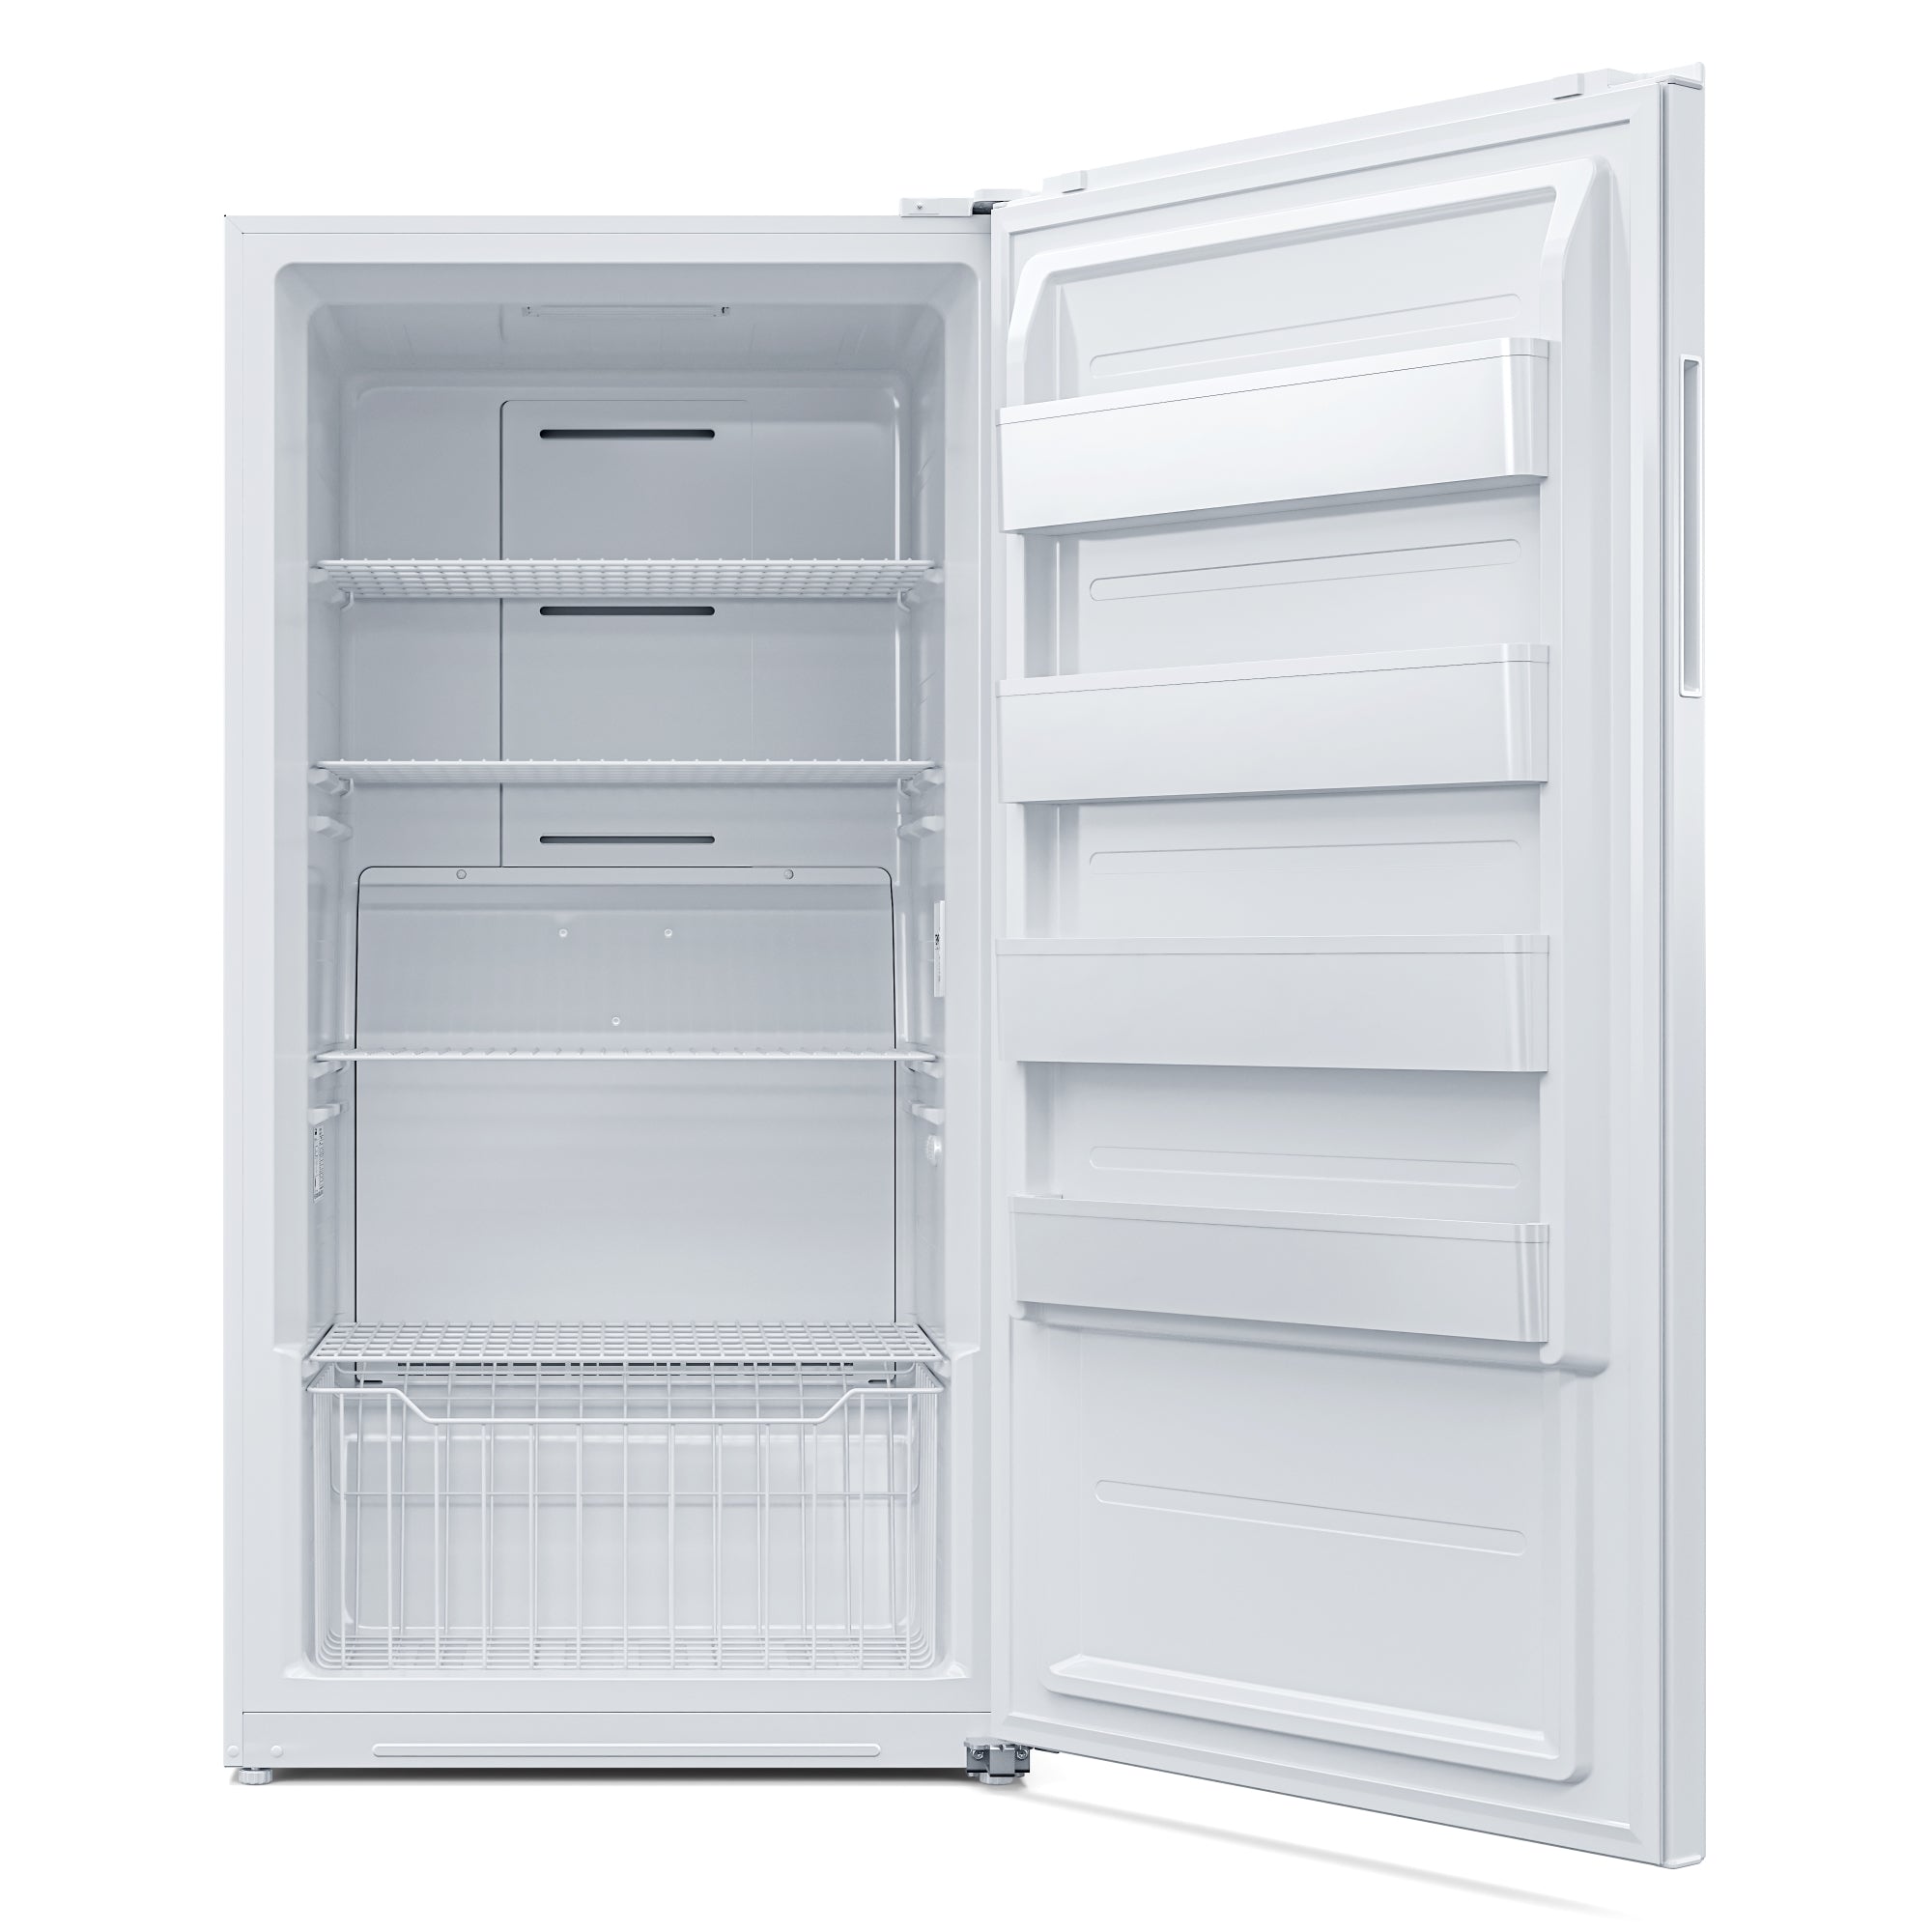 KoolMore 17 cu. ft. Upright Freezer in White -, RUF-17C at Tractor Supply  Co.